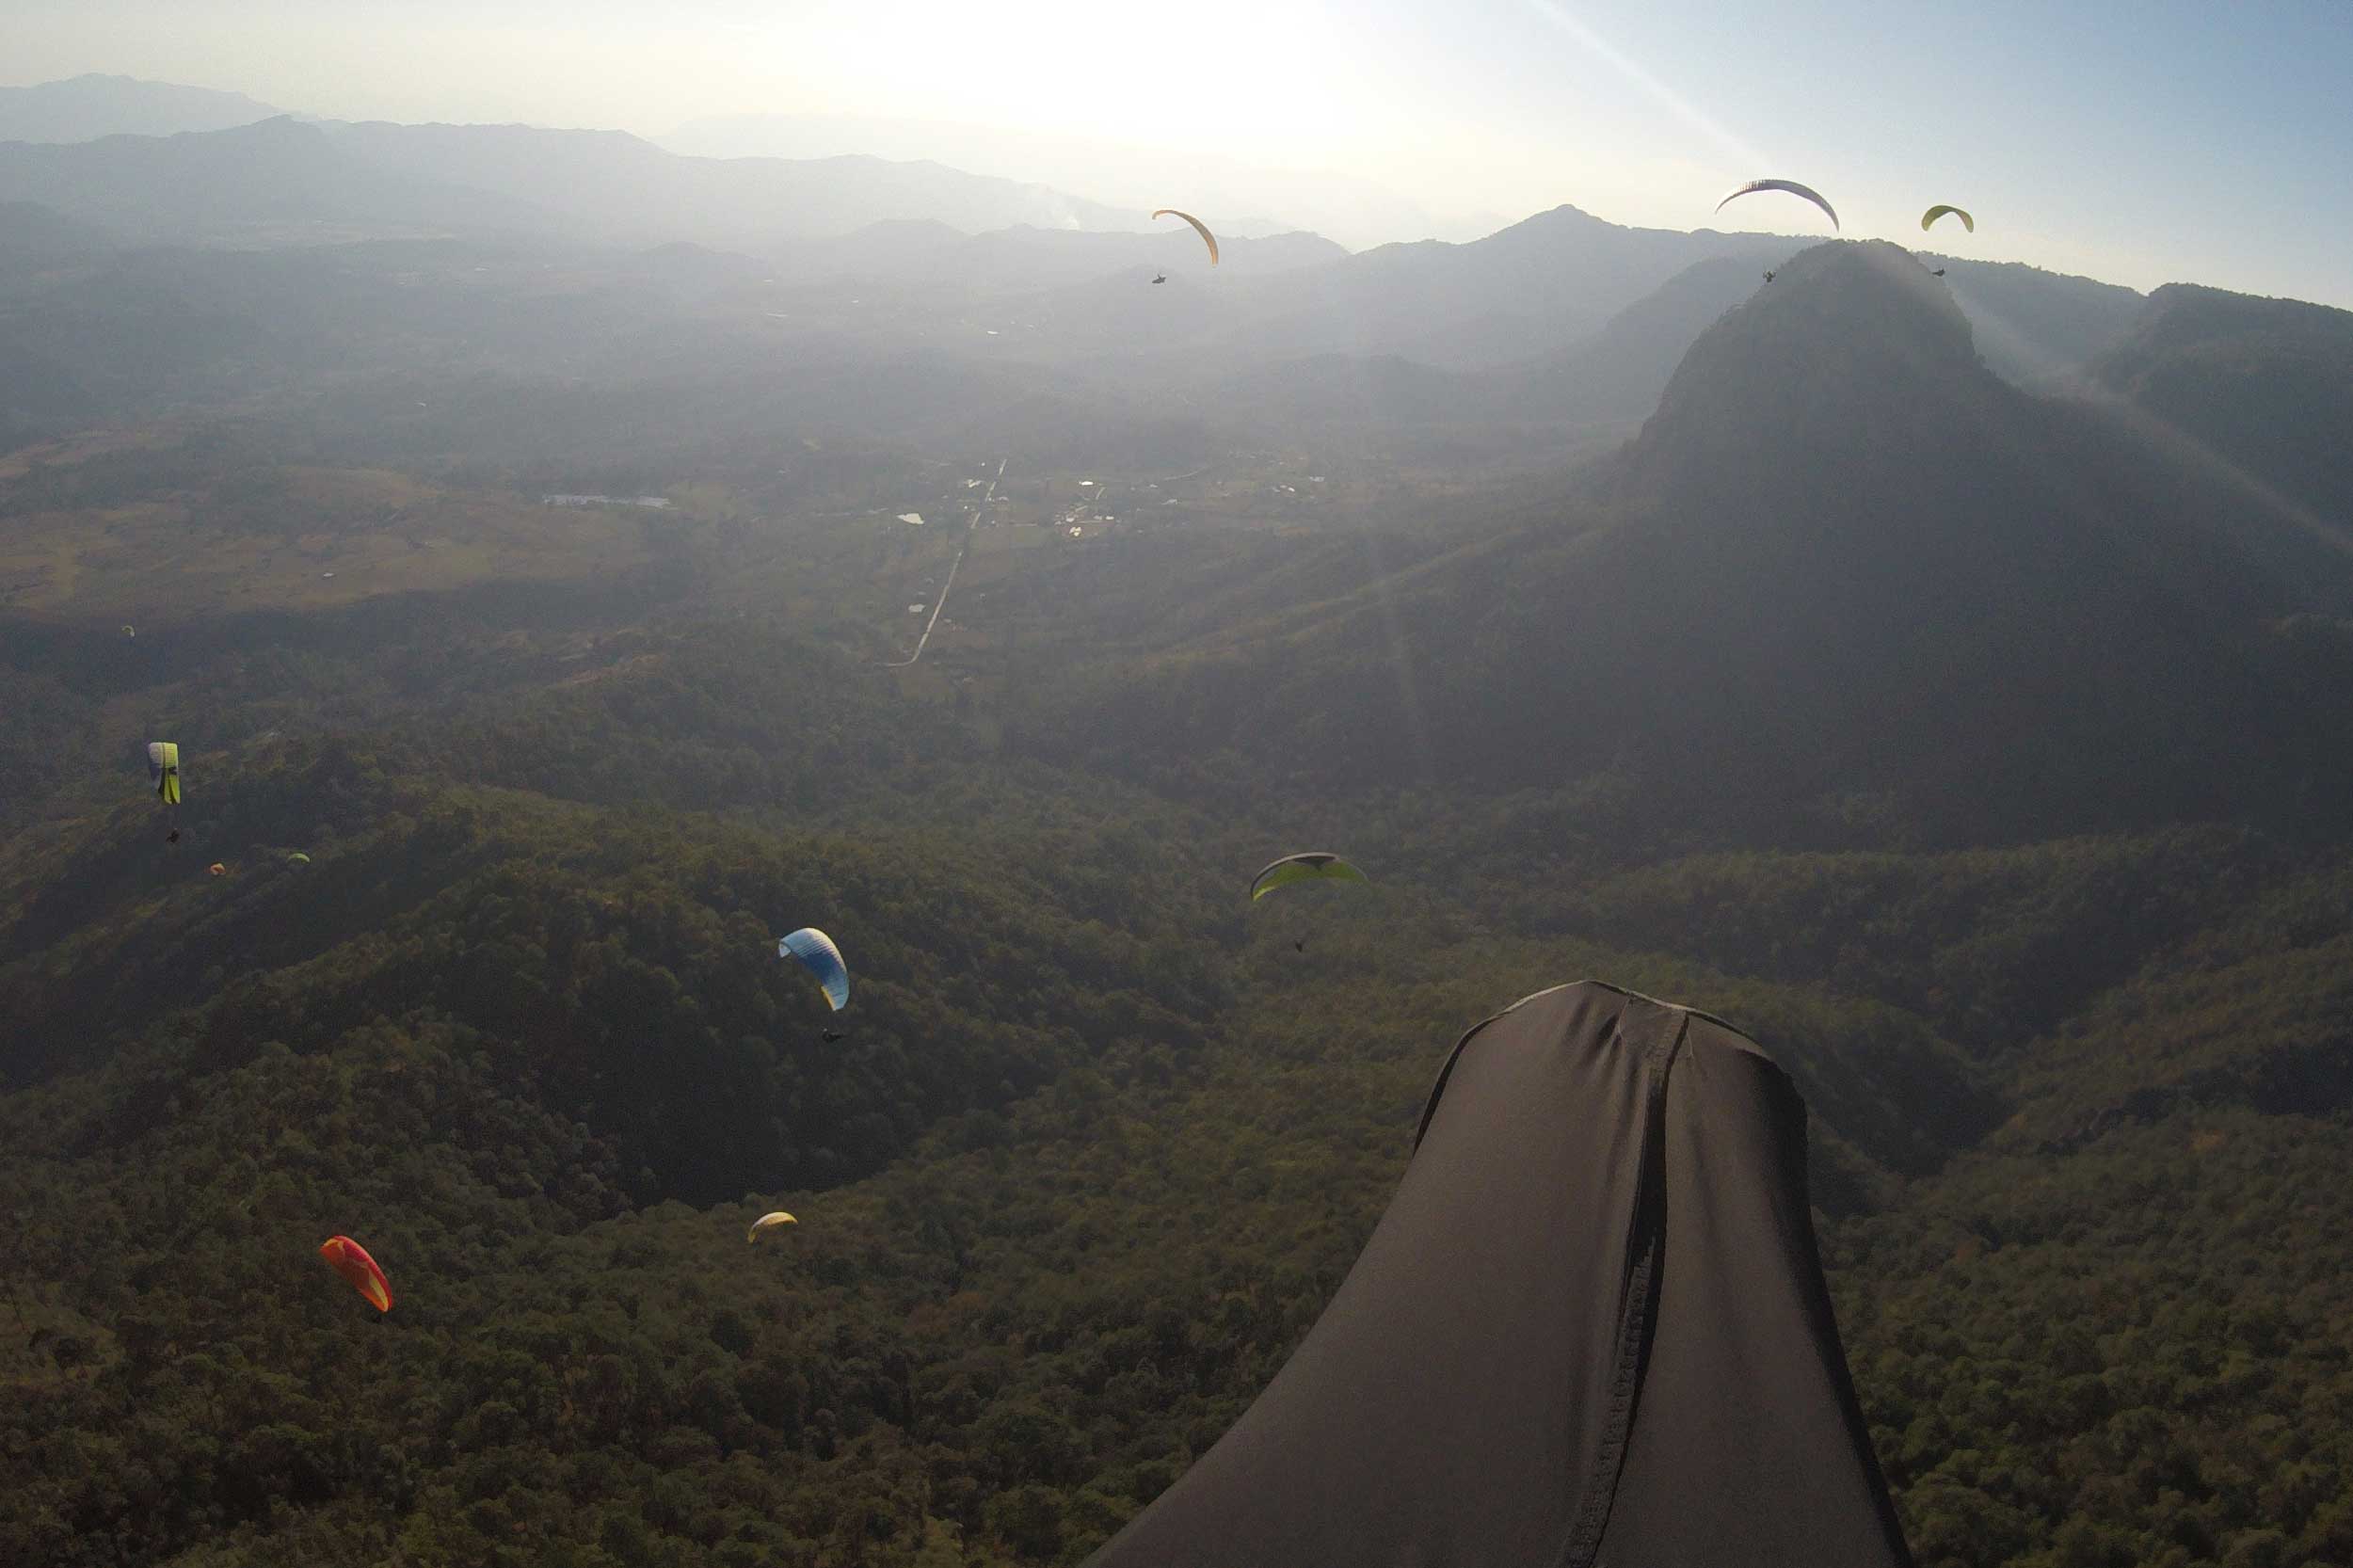 Paraglide-New-England-Trips-Valle-de-Bravo-Mexico-Gallery-Tim-FPV-Piano-View.jpg